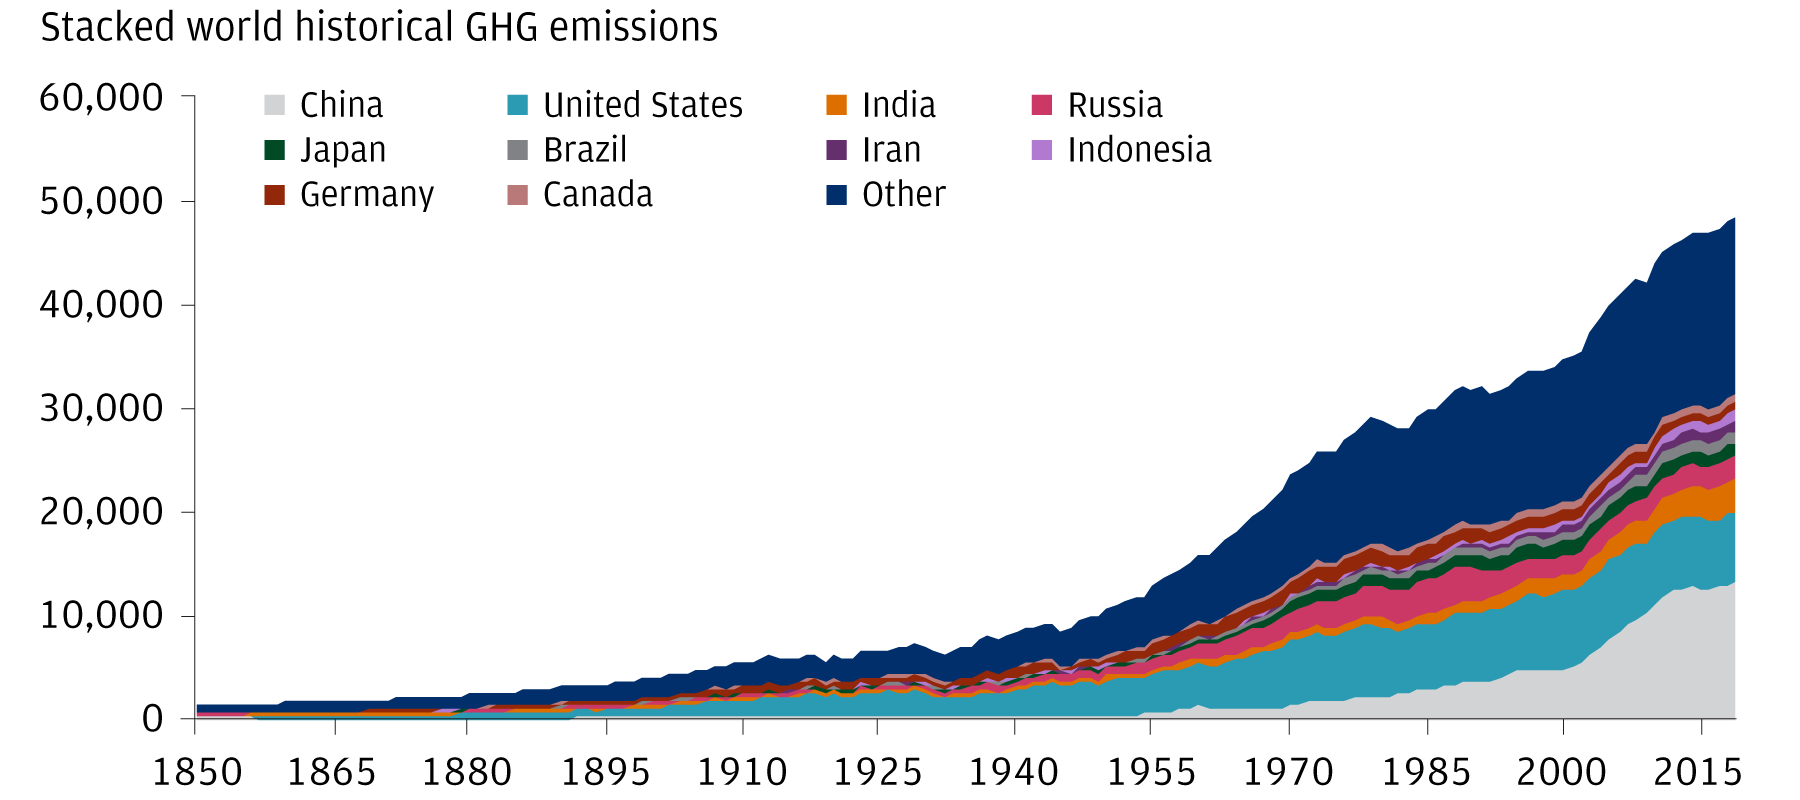 This chart shows the stacked world GHG emissions since 1850. It shows the rise of greenhouse gas emissions from pre industrial levels. China and the US are two of the largest contributors making up a third of global emissions in 2022. These levels show no sign of slowing.